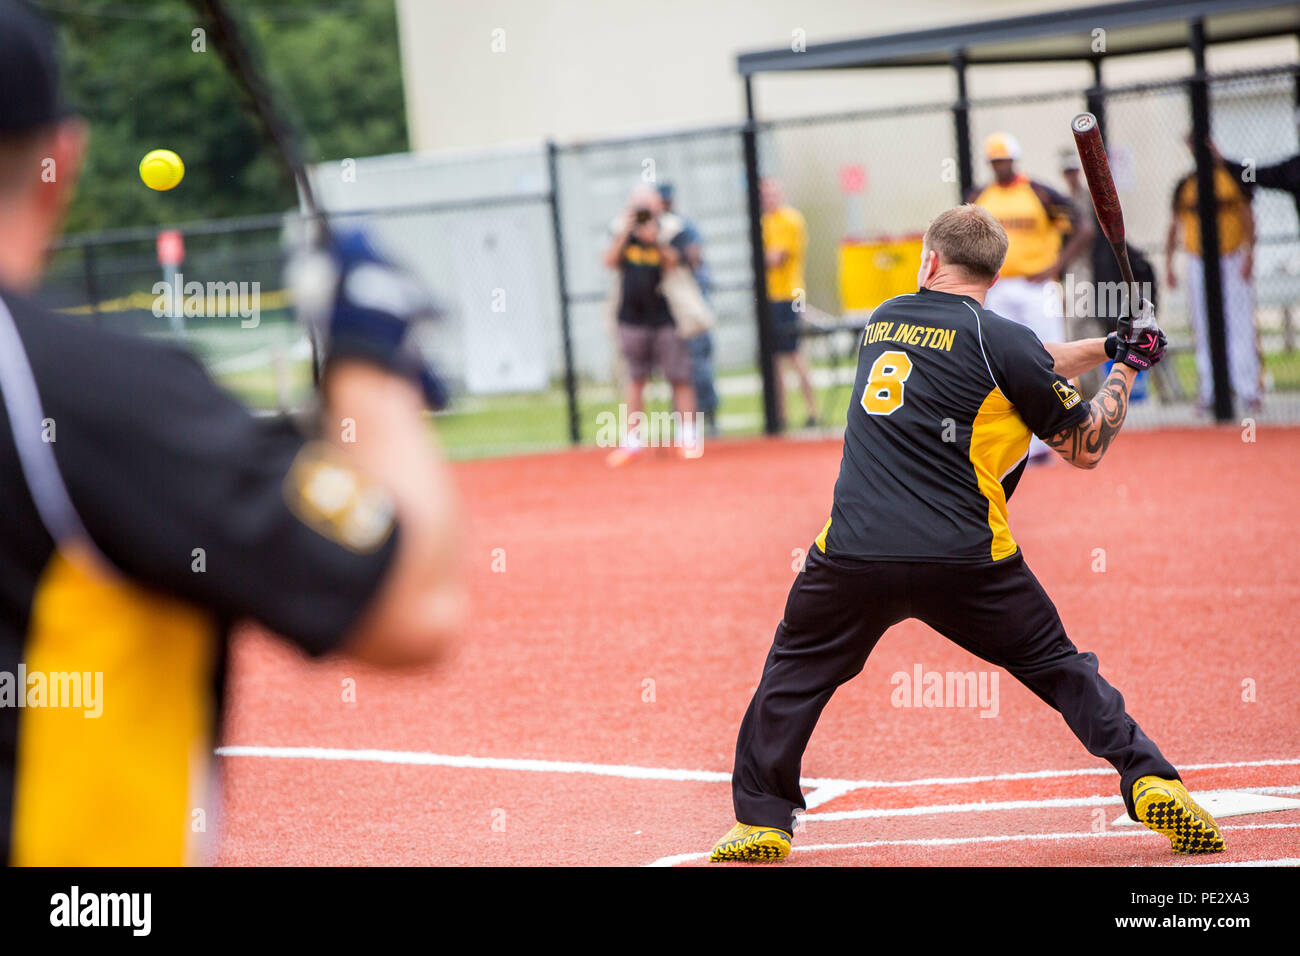 U.S. Army Staff Sgt. Kenneth Turlington, an infielder for the U.S. Army men's softball team, prepares to swing during the 2015 Armed Forces Softball Tournament at the Harry Agganis Softball Field on Camp Lejeune, N.C., Sept. 24, 2015. 160 athletes representing the U.S. Army, Marine Corps, Navy, and Air Force competed during a weeklong softball tournament hosted by Marine Corps Community Services. (U.S. Marine Corps photo by Sgt. Christopher Q. Stone, MCIEAST-MCB CAMLEJ Combat Camera/Released) Stock Photo